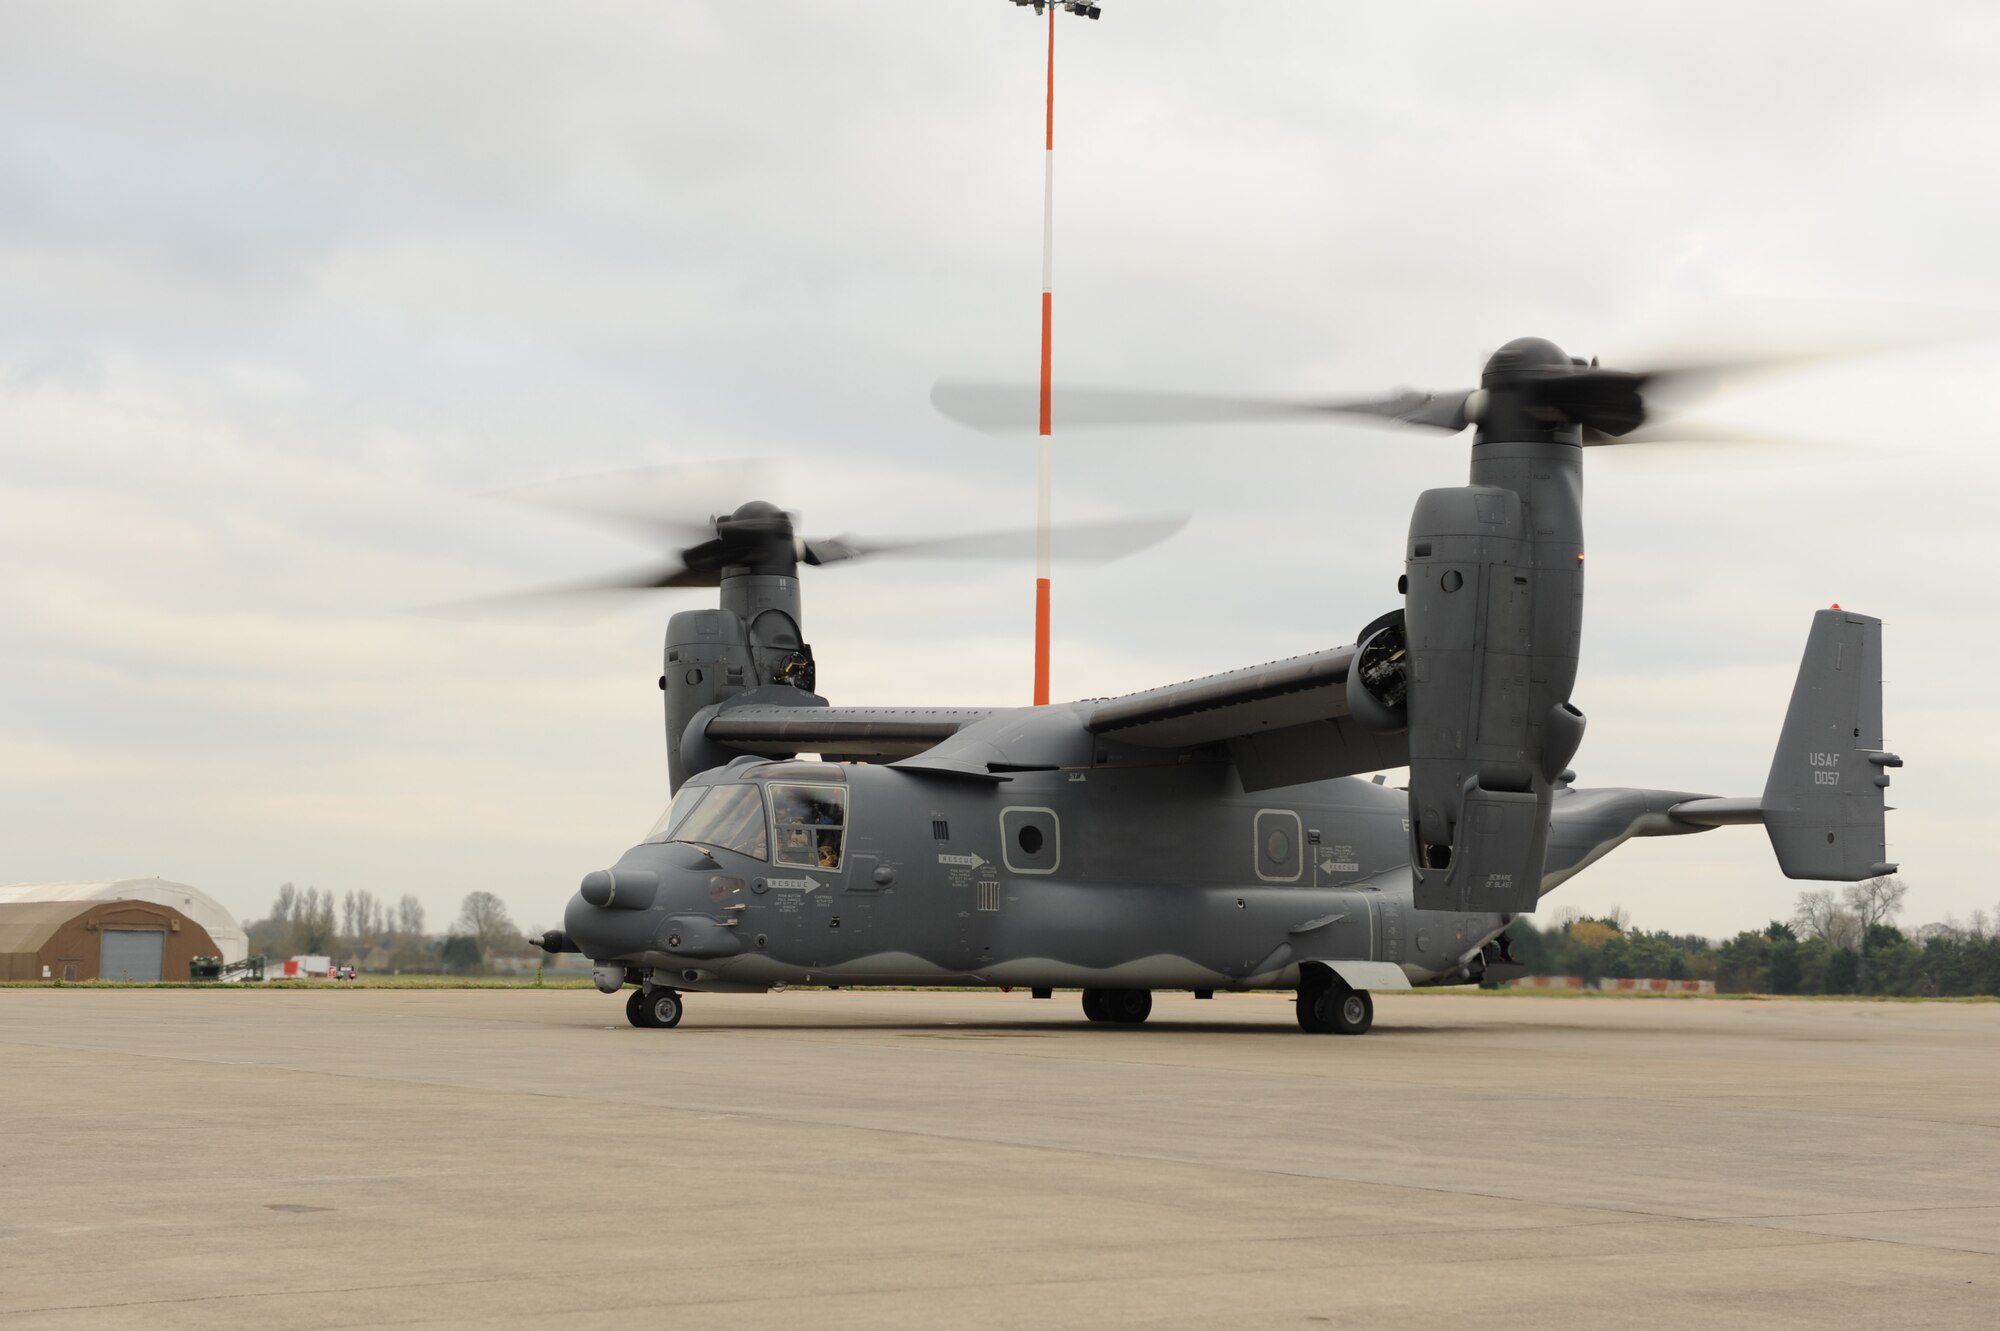 A CV-22 Osprey from the 7th Special Operations Squadron prepares to taxi during an exercise at RAF Fairford, England, Dec. 10, 2013. The 352nd Special Operations Group conducted the exercise involving approximately 130 Airmen and six aircraft at RAF Fairford from Dec. 9-12. The CV-22 can perform missions that normally would require both fixed-wing and rotary-wing aircraft. (U.S. Air Force photo by Staff Sgt. Stephen Linch/Released)